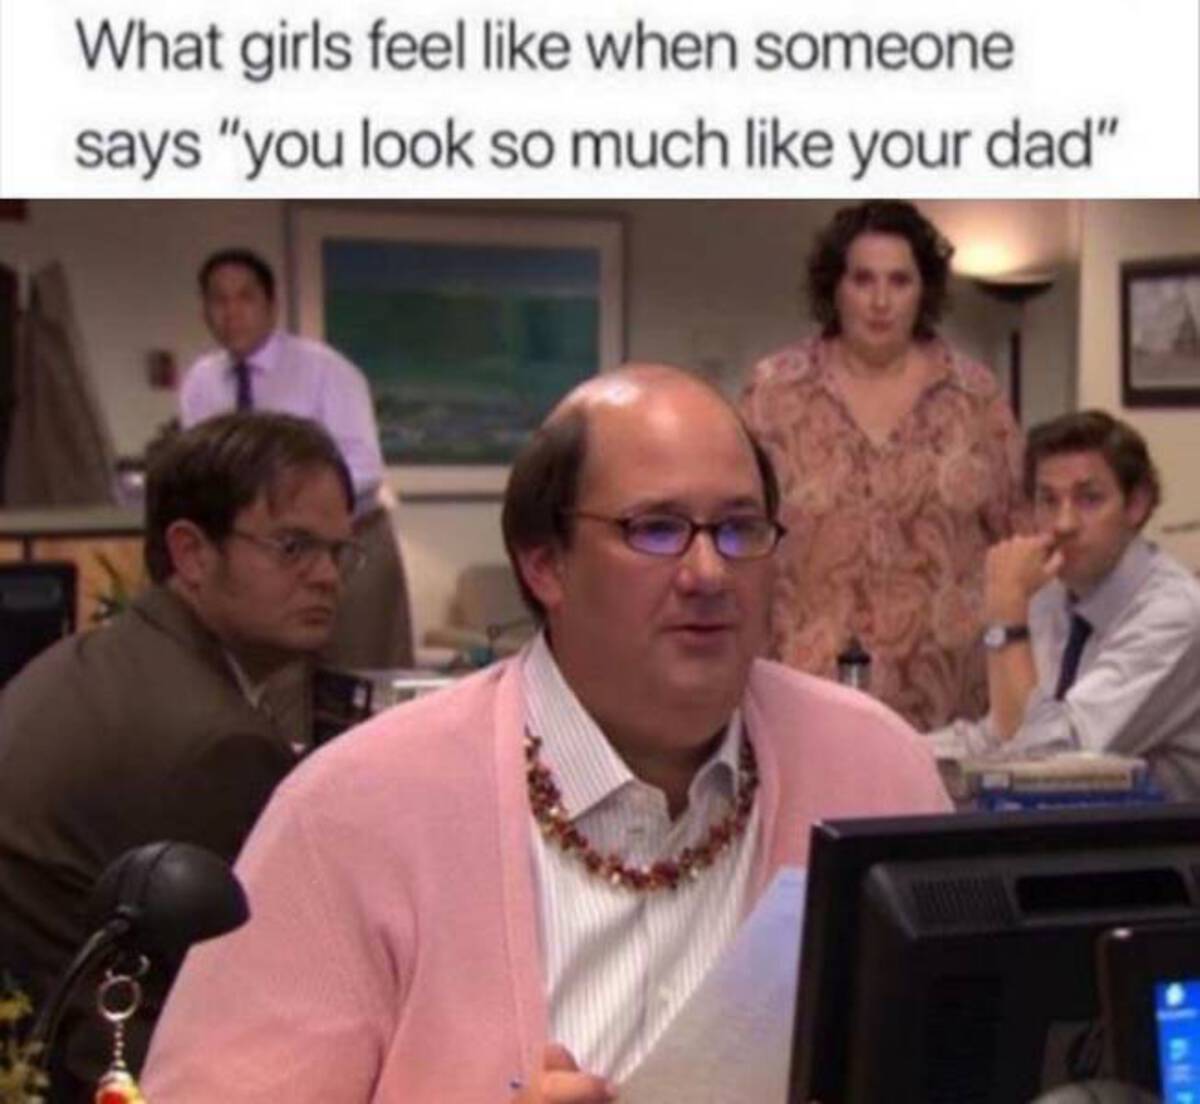 office memes - What girls feel when someone says "you look so much your dad"